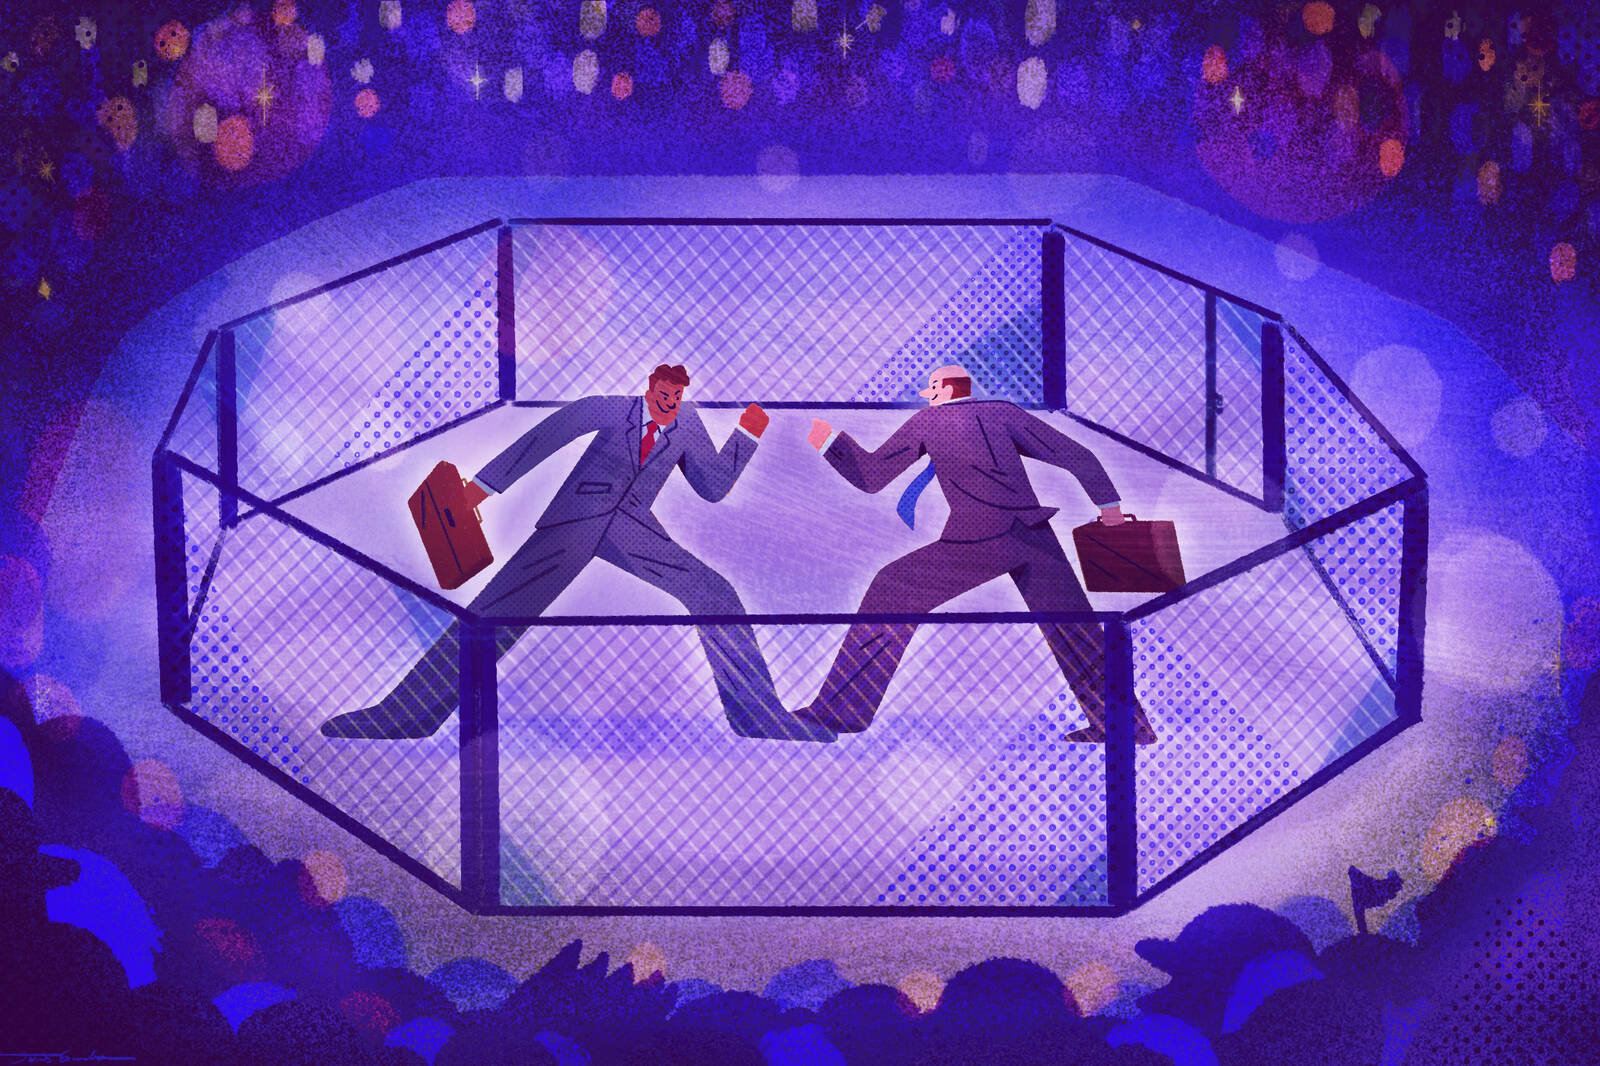 two lawyer stand in an MMA octagon